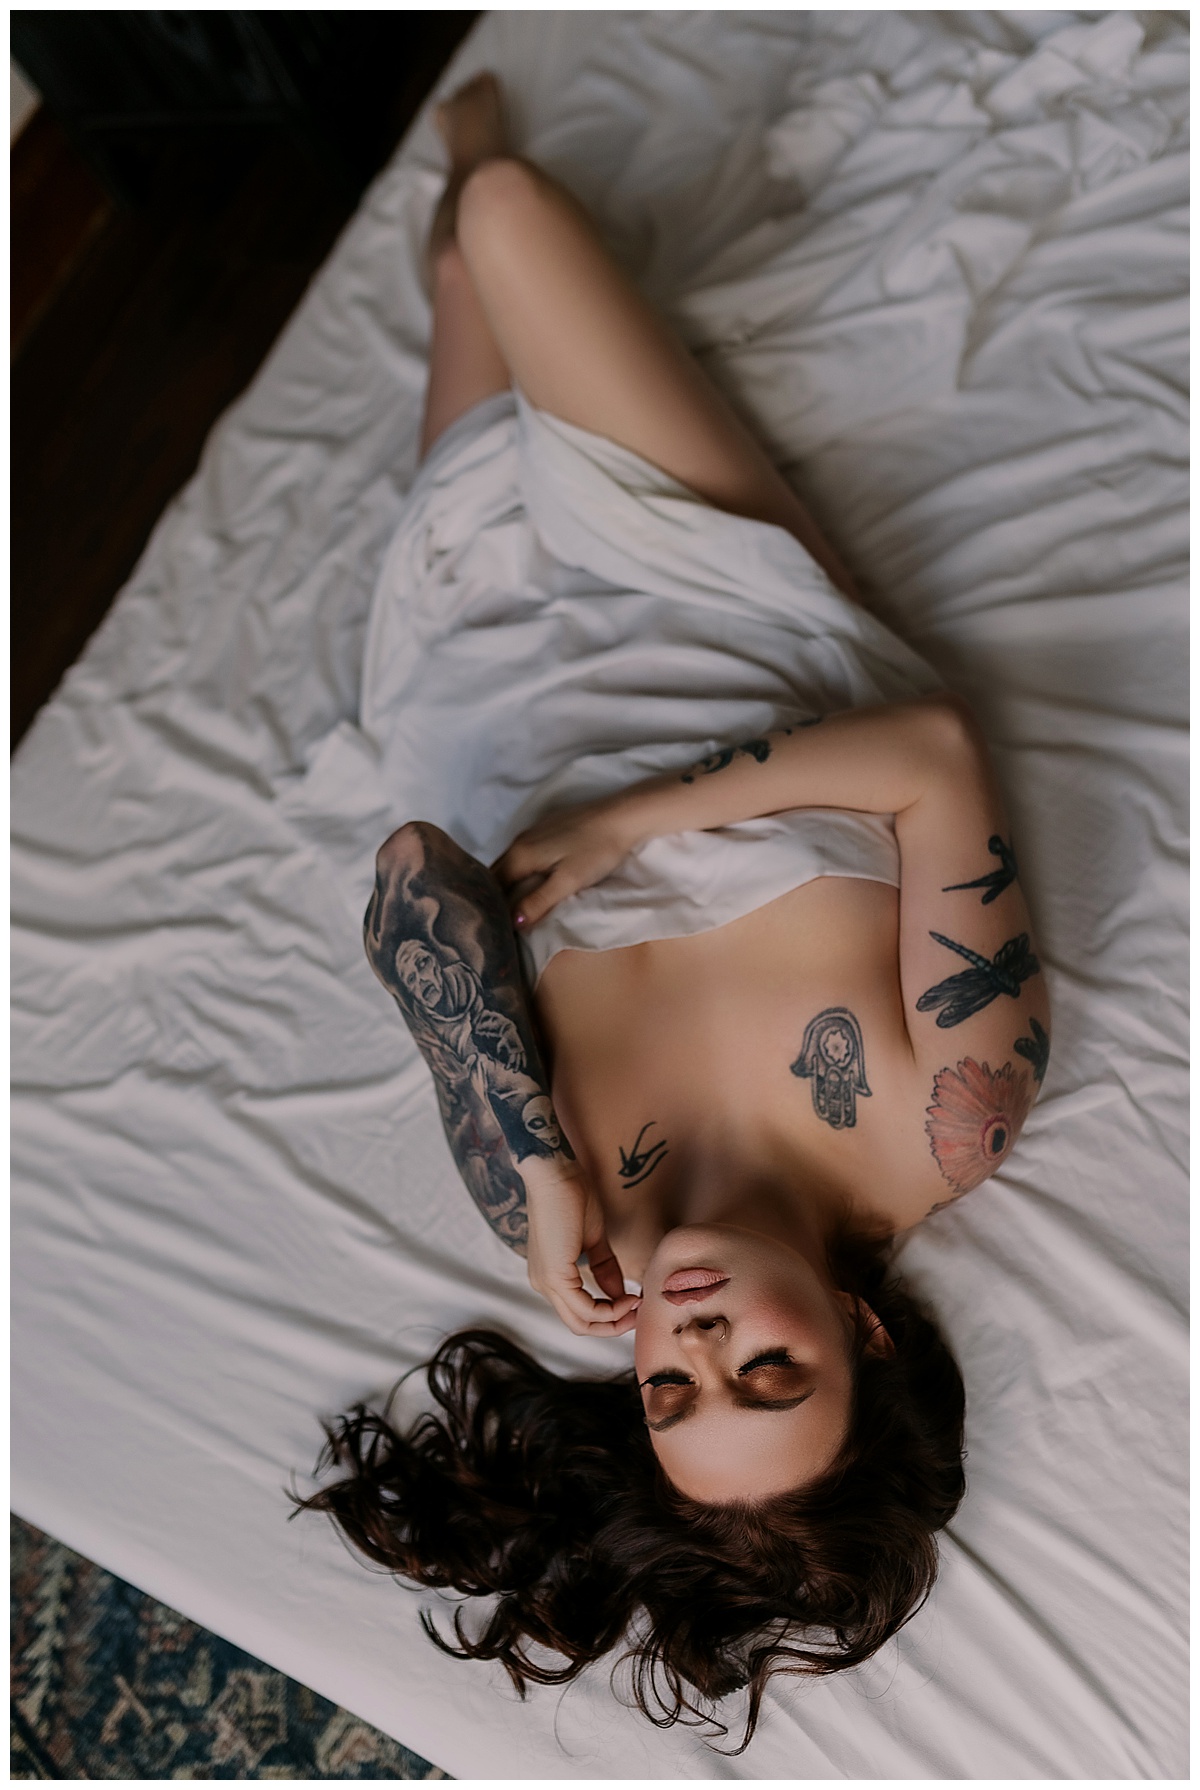 Adult lays on the bed wearing a white sheet for Sioux Falls Boudoir Photographer